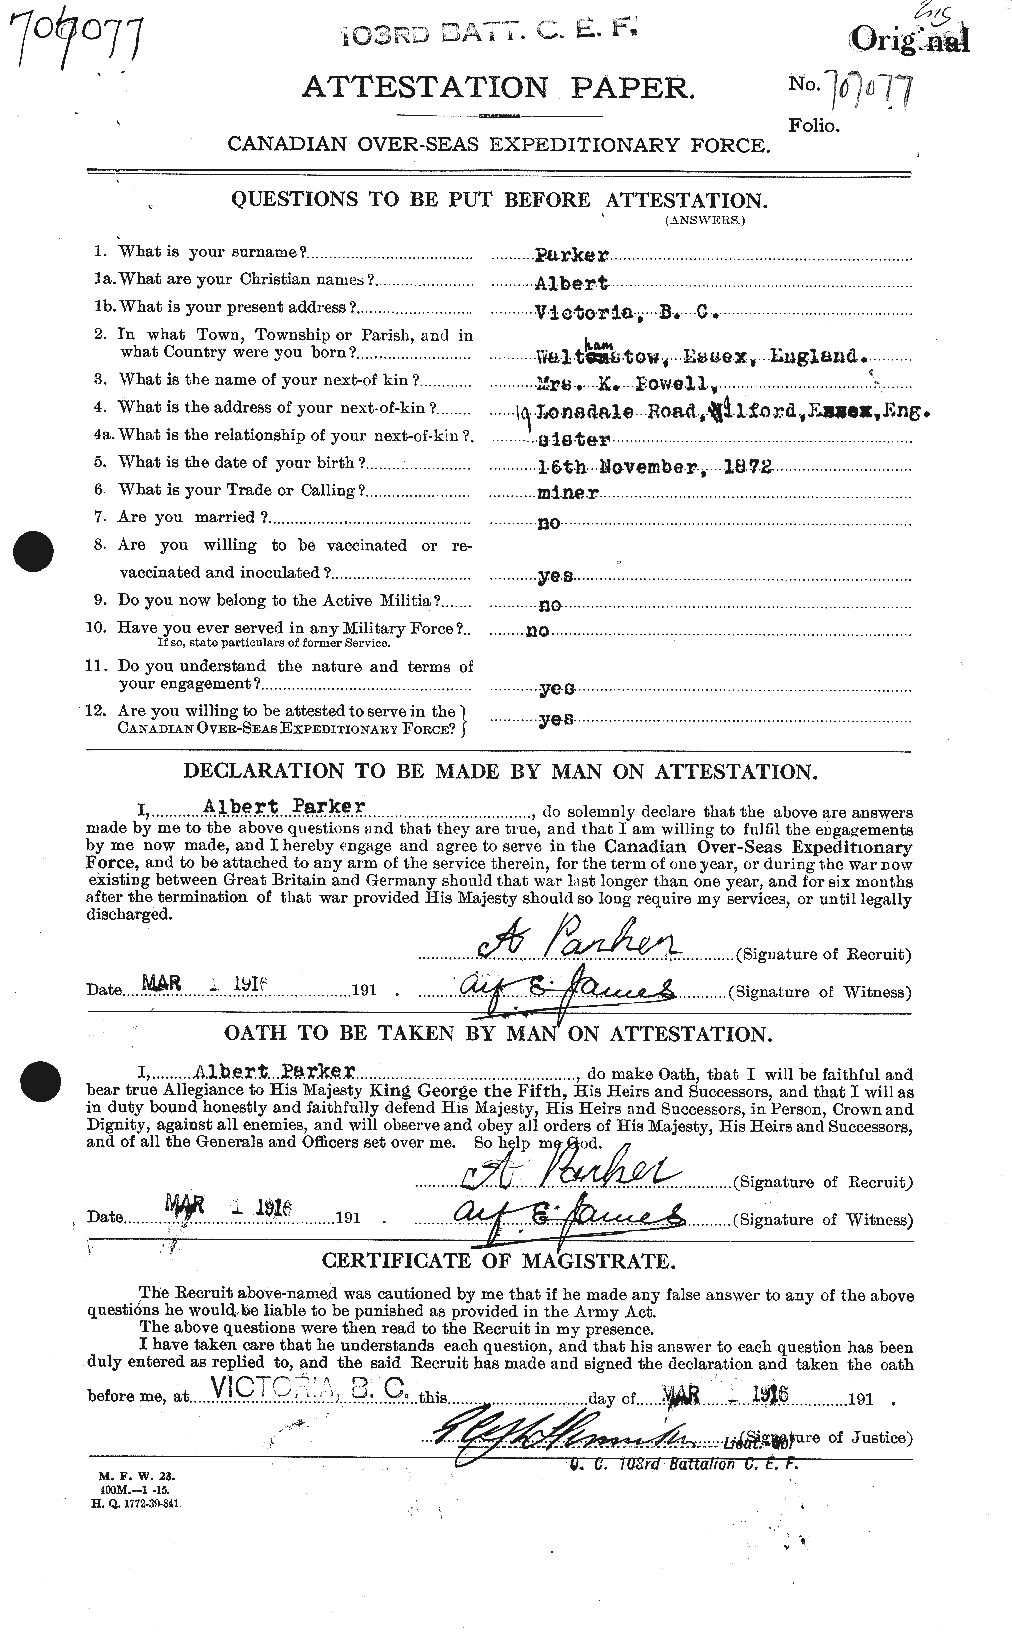 Personnel Records of the First World War - CEF 564958a